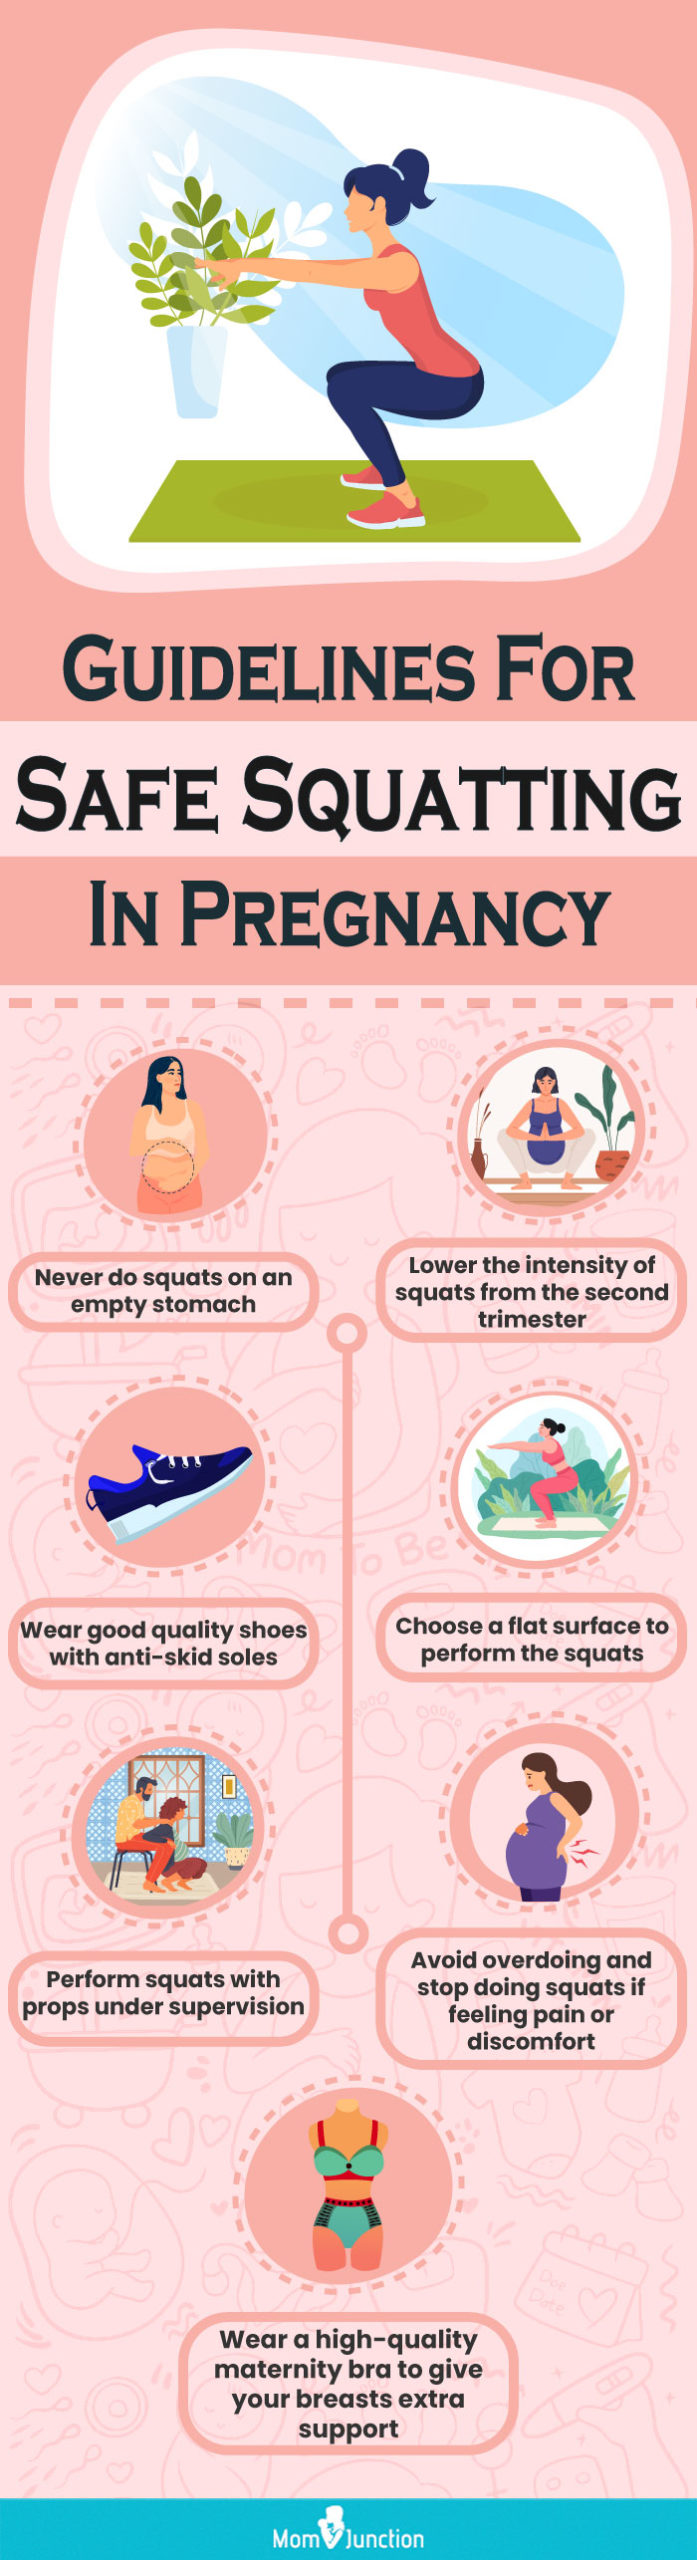 How to Squat for a Healthy Pelvic Floor: Pregnancy Safe Squatting